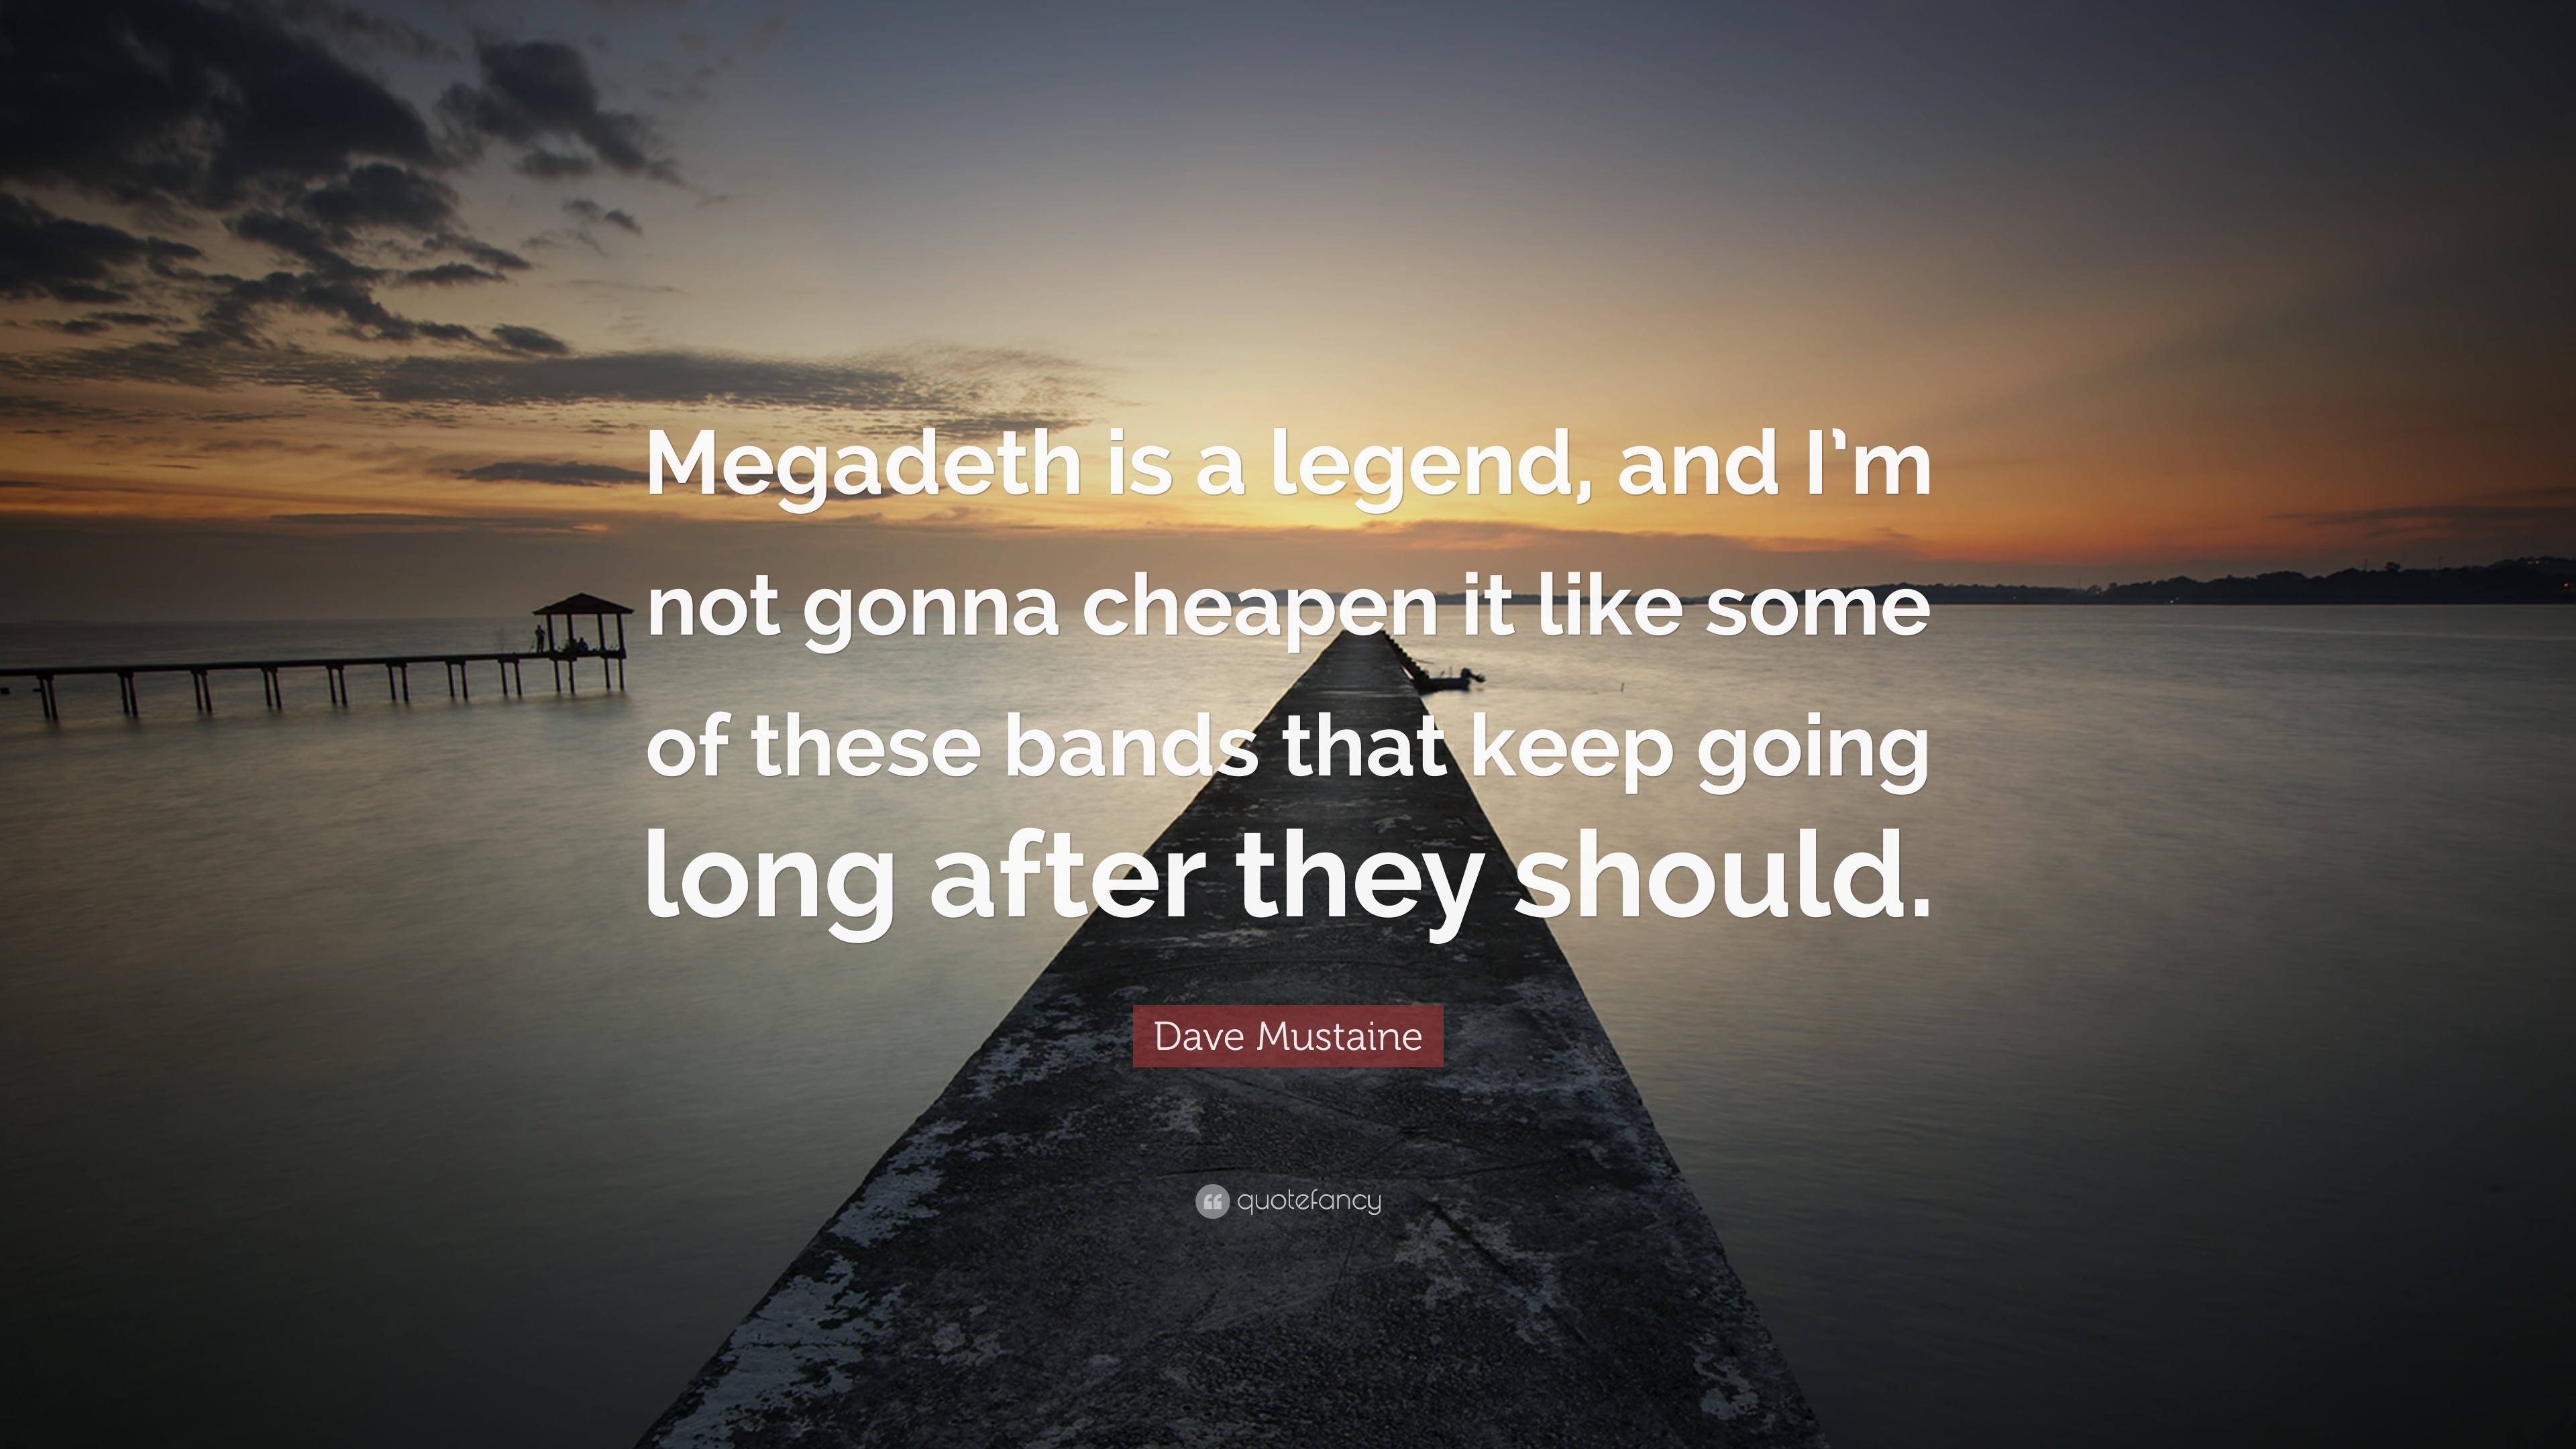 3840x2160 Dave Mustaine Quote: “Megadeth is a legend, and I'm not gonna